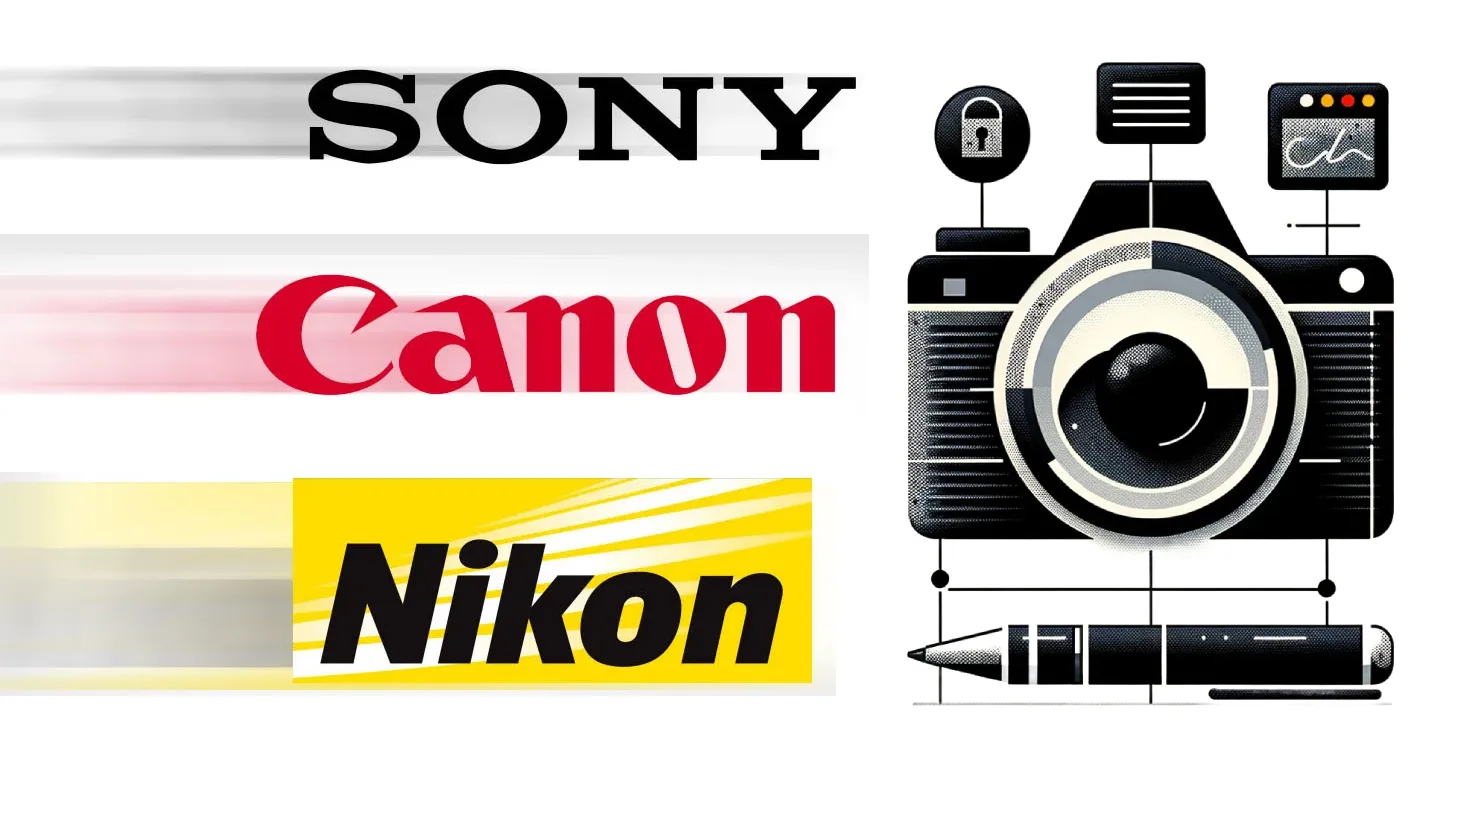 Camera Giants Nikon, Sony, and Canon Unite to fight AI Fake images with Cutting-Edge Digital Signatures